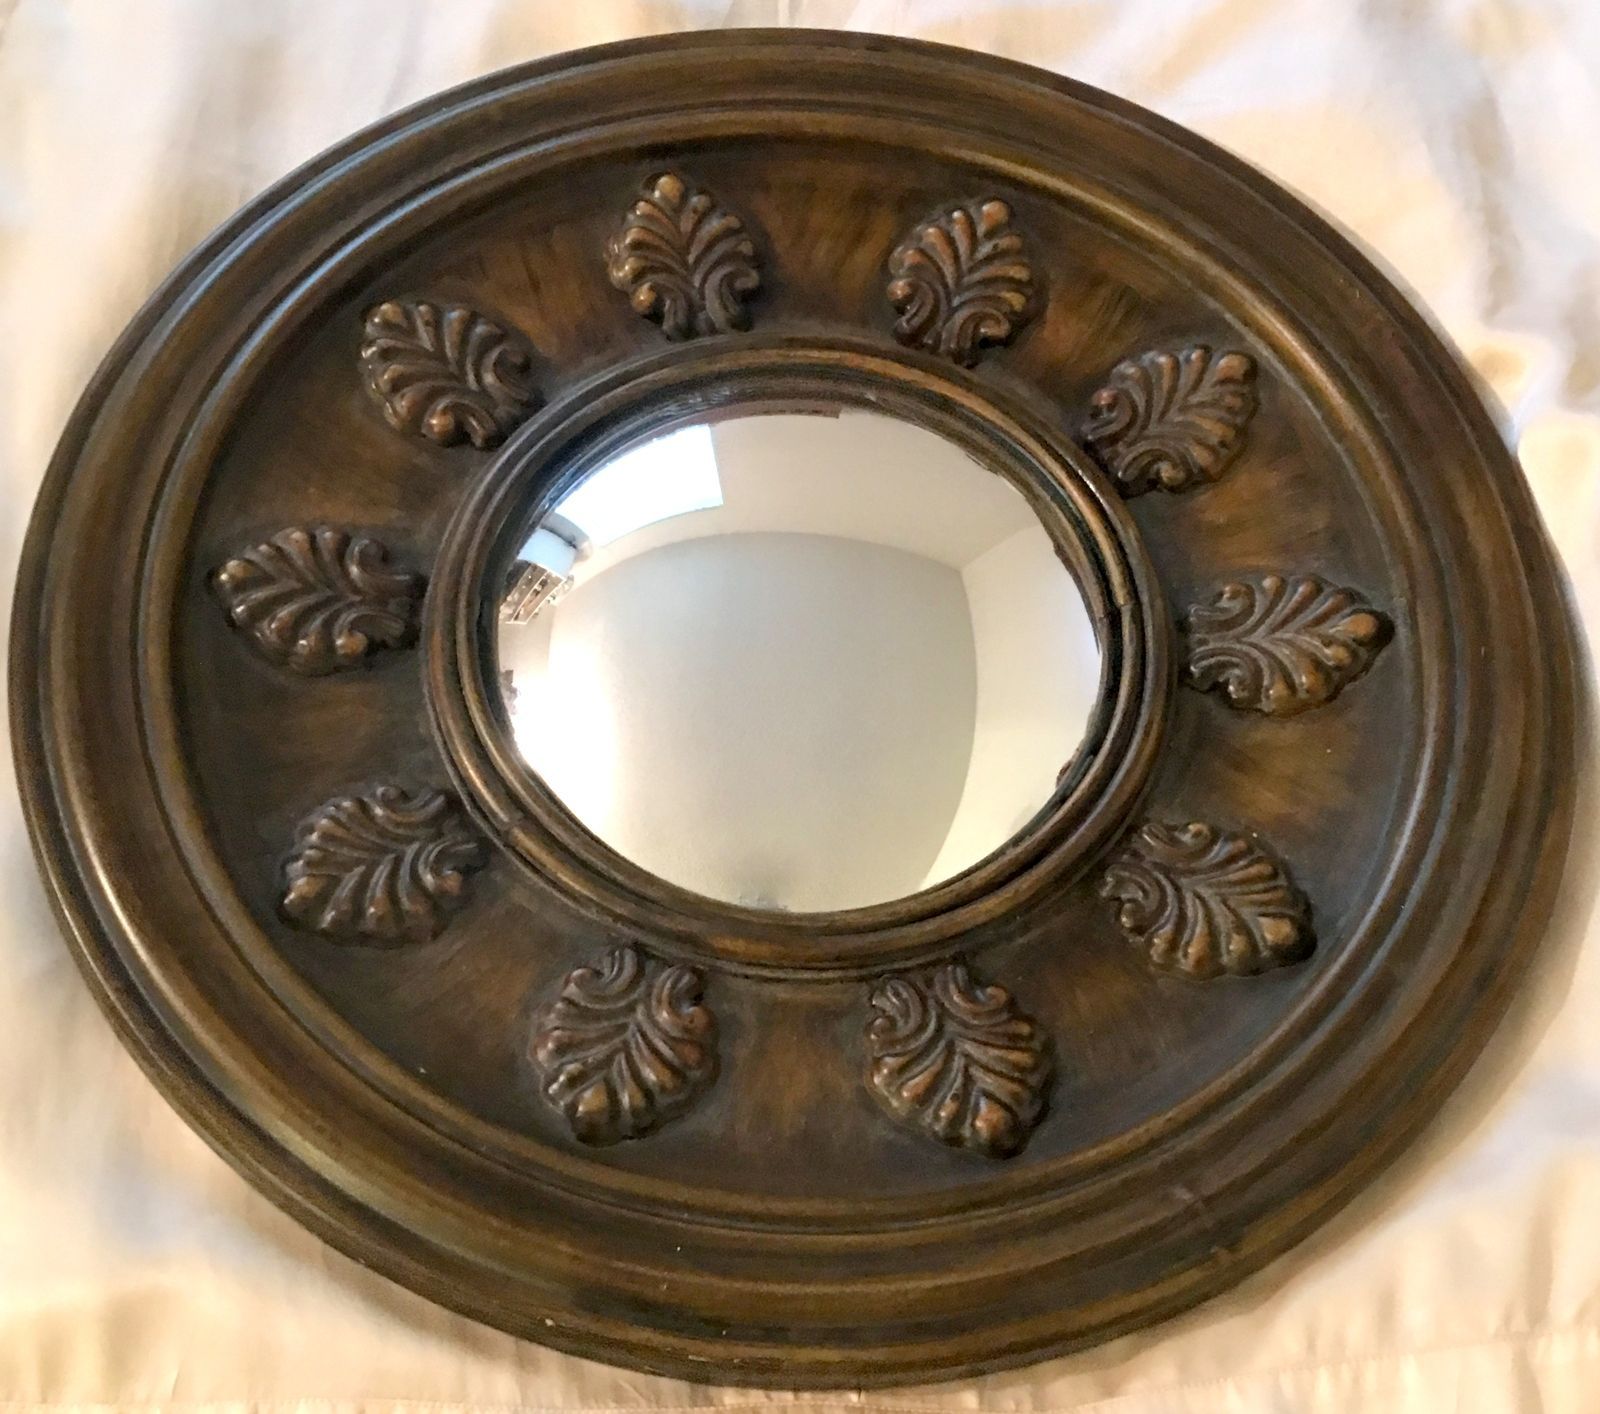 Round Convex Mirror Decorative Wall Mirror Tuscan Style Brown Metal Regarding Brown Leather Round Wall Mirrors (View 10 of 15)